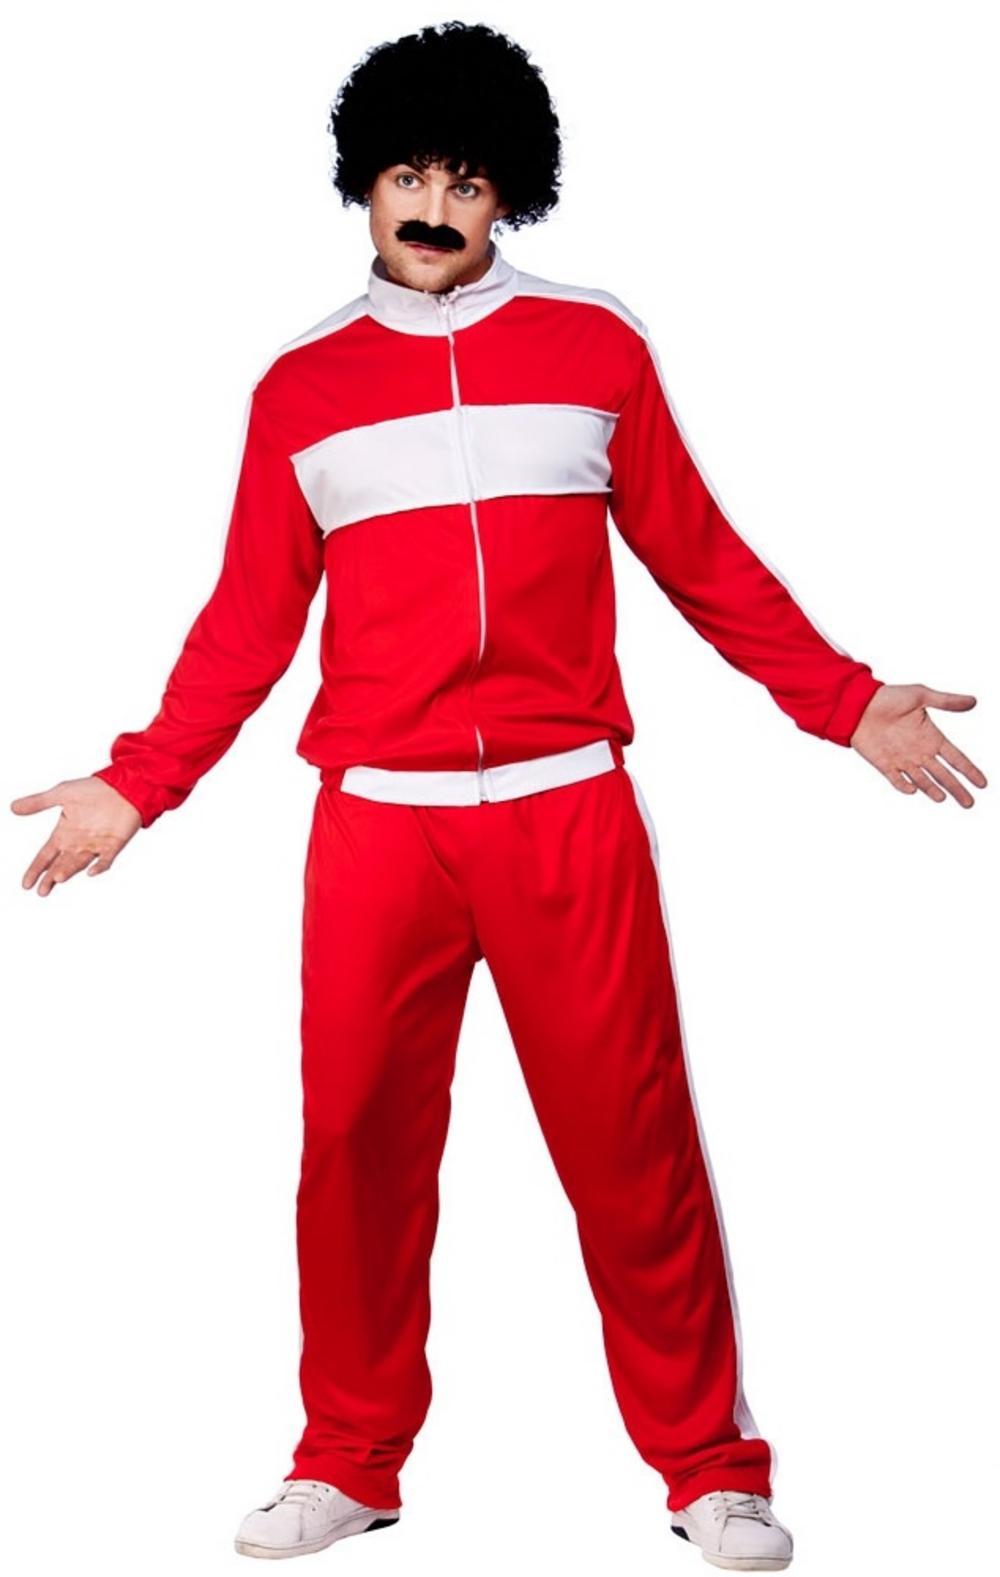 Scouser Tracksuit includes Jacket & Trousers